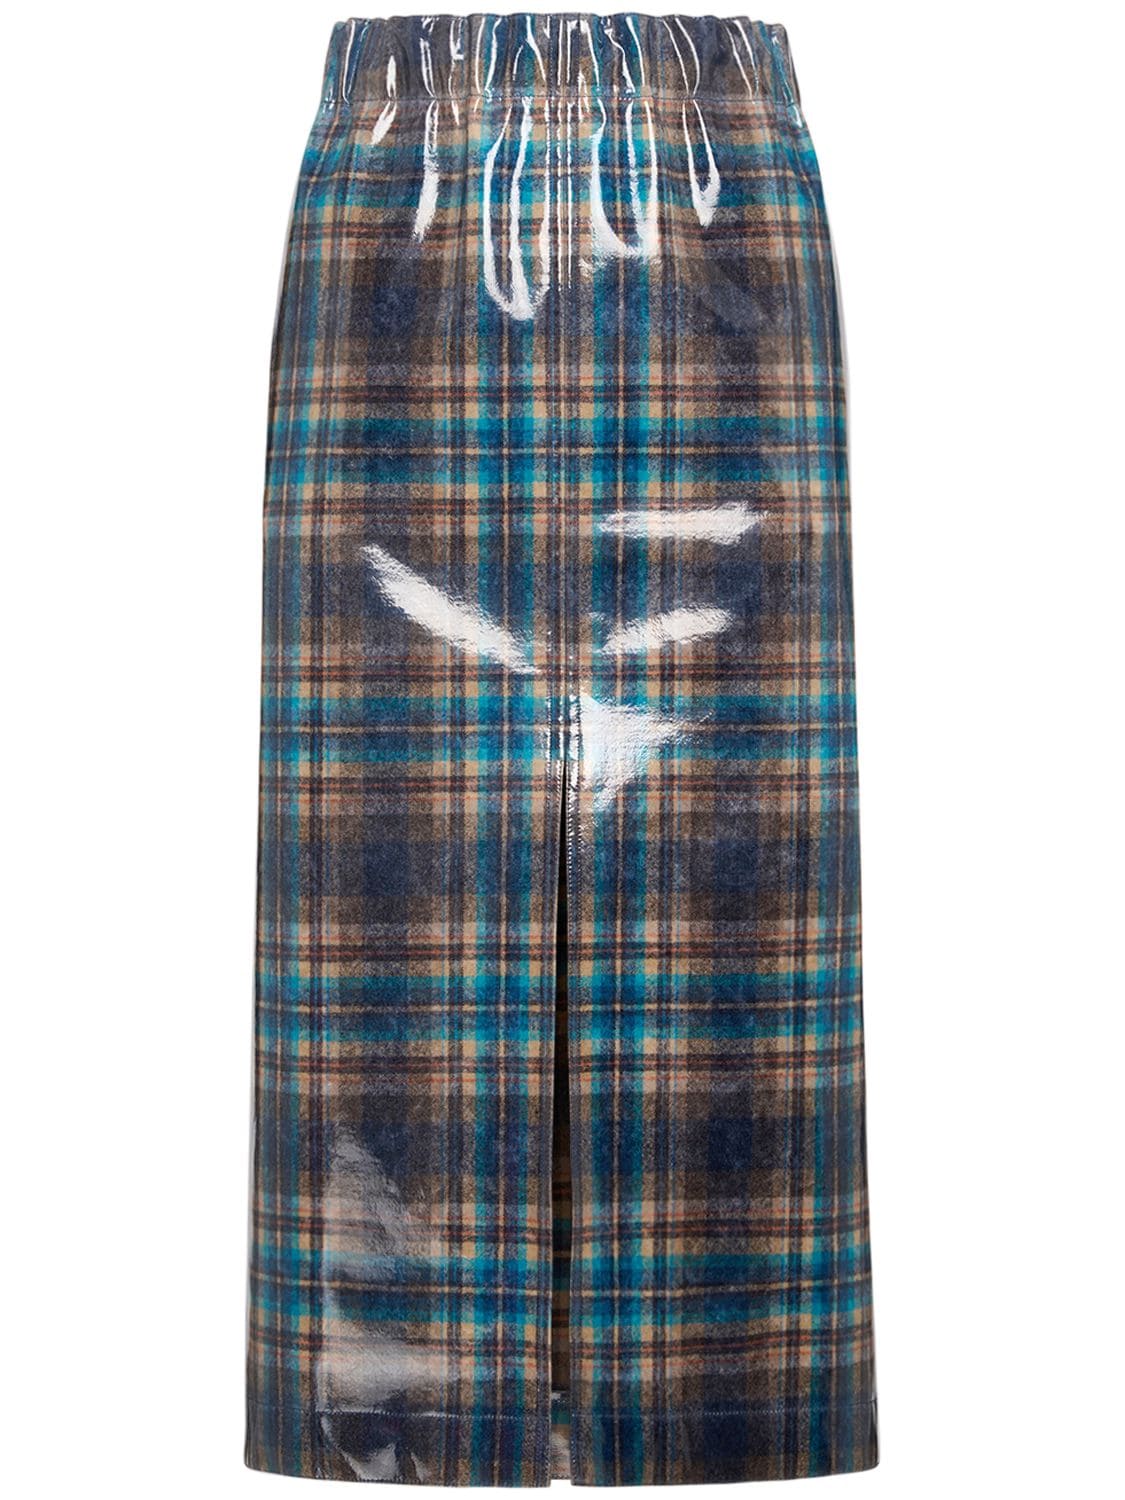 Maison Margiela Check Printed Wool Midi Skirt In Patterned Blue